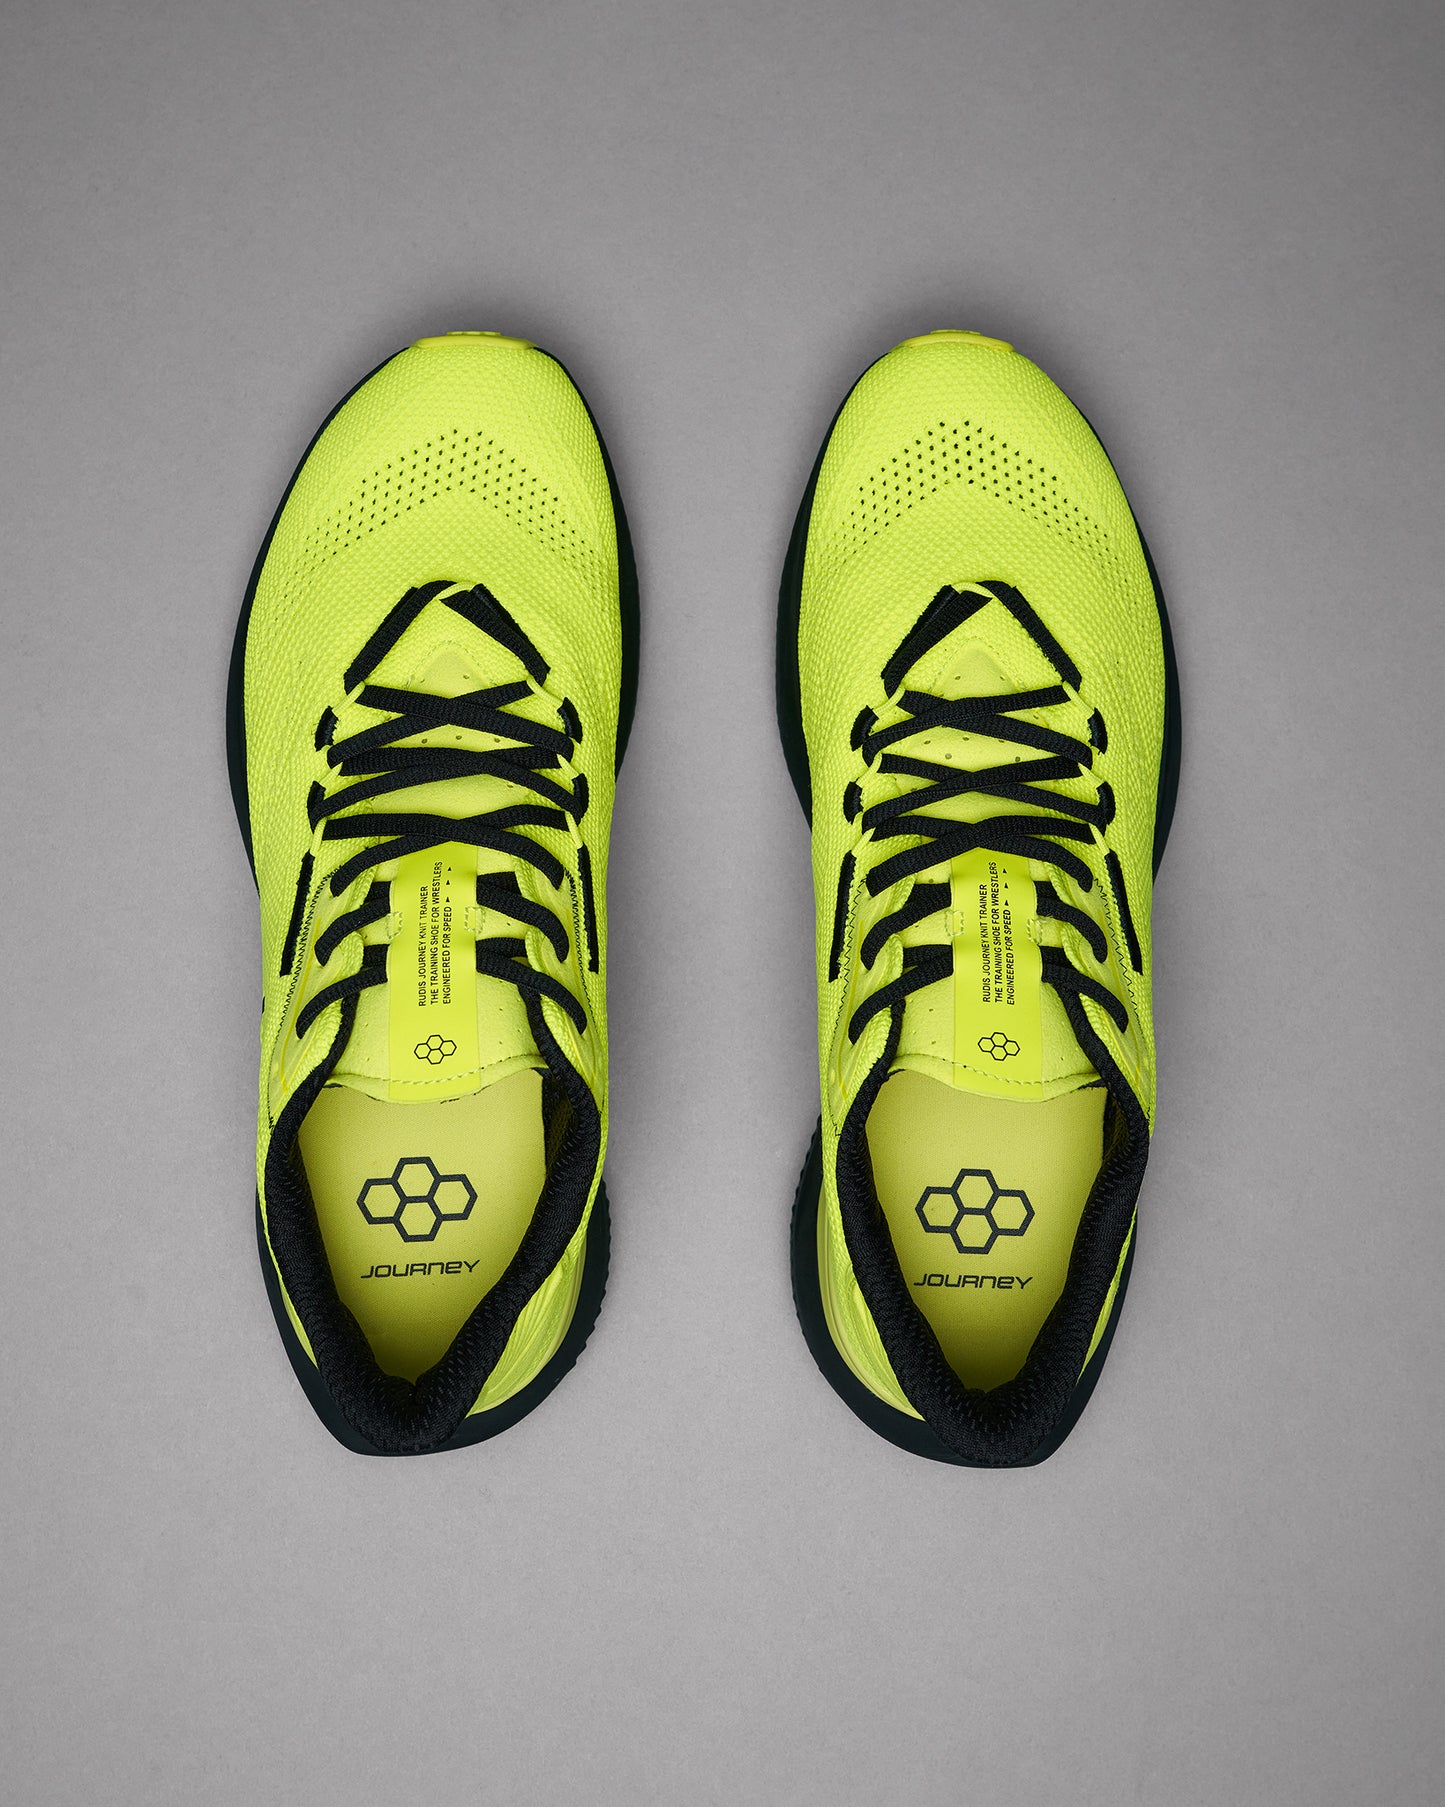 RUDIS Journey Knit Adult Training Shoes - Neon